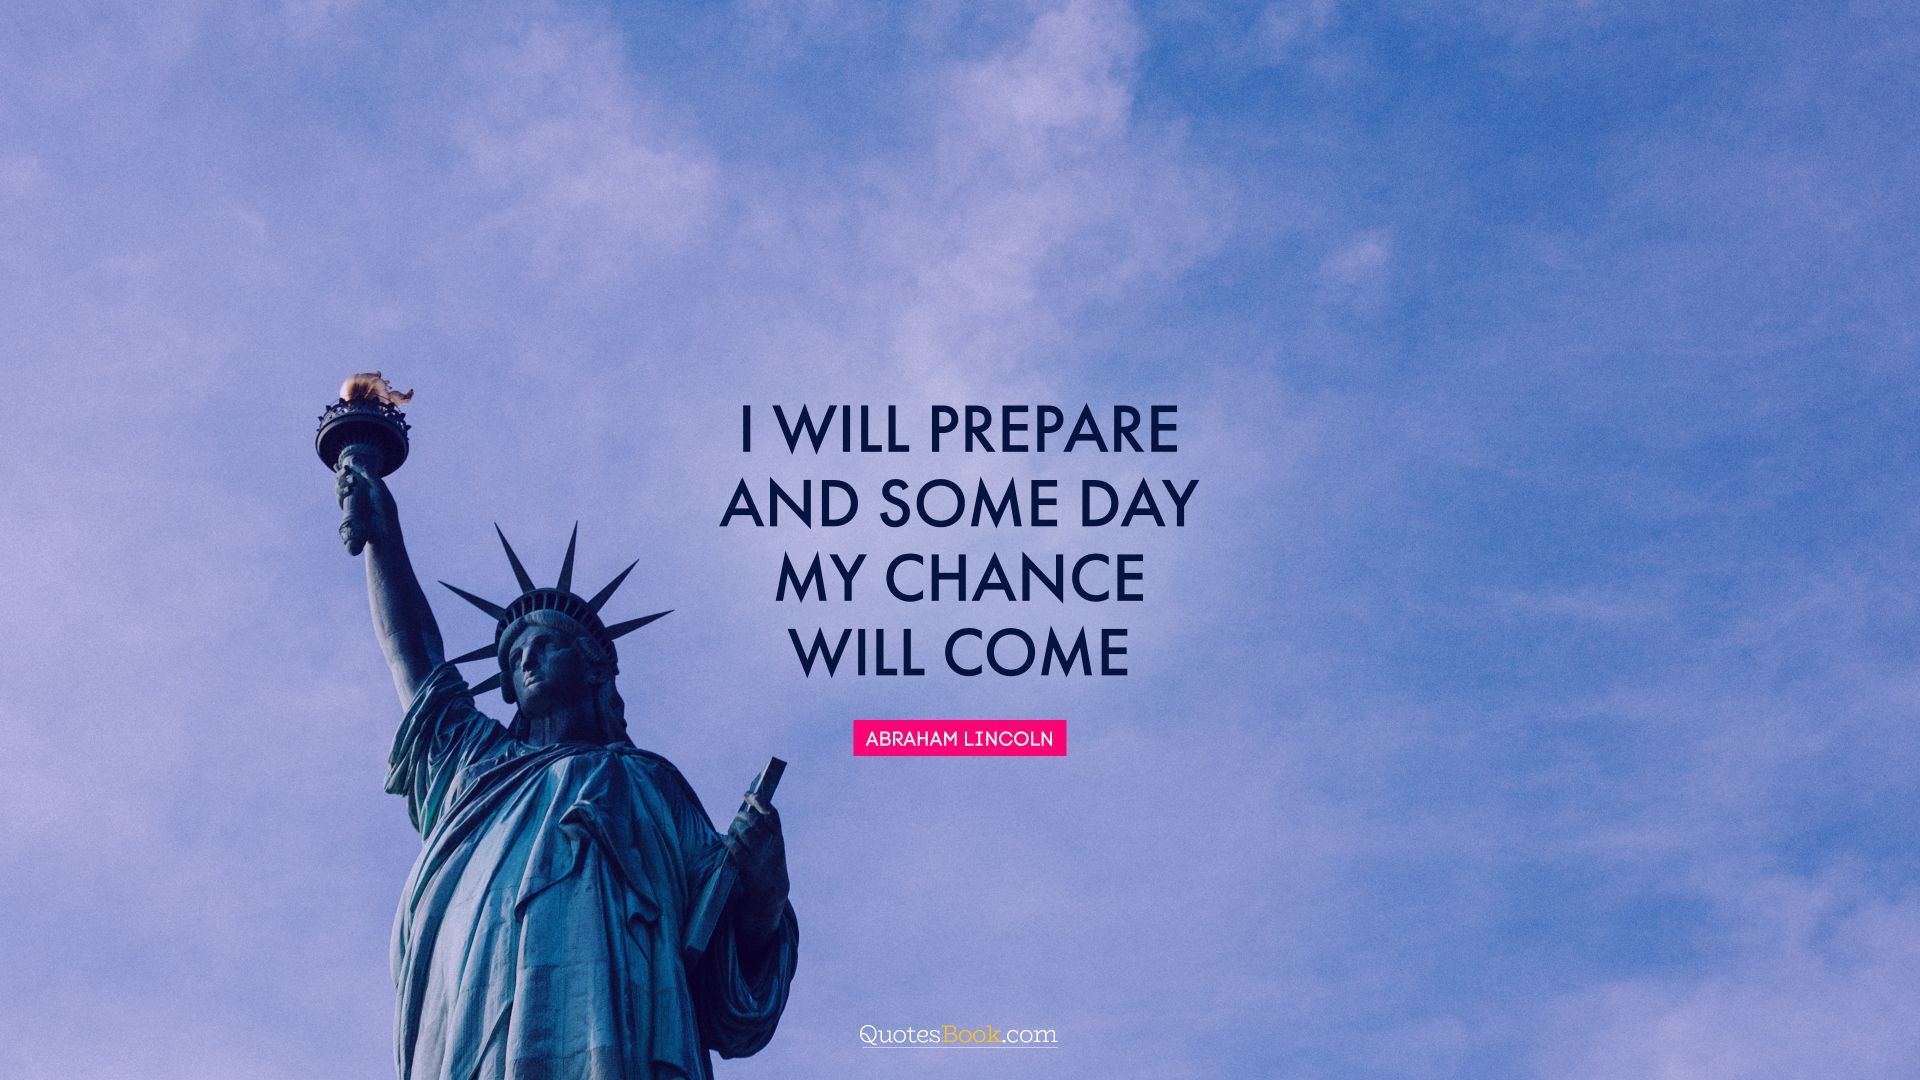 I will prepare and some day my chance will come. - Quote by Abraham Lincoln